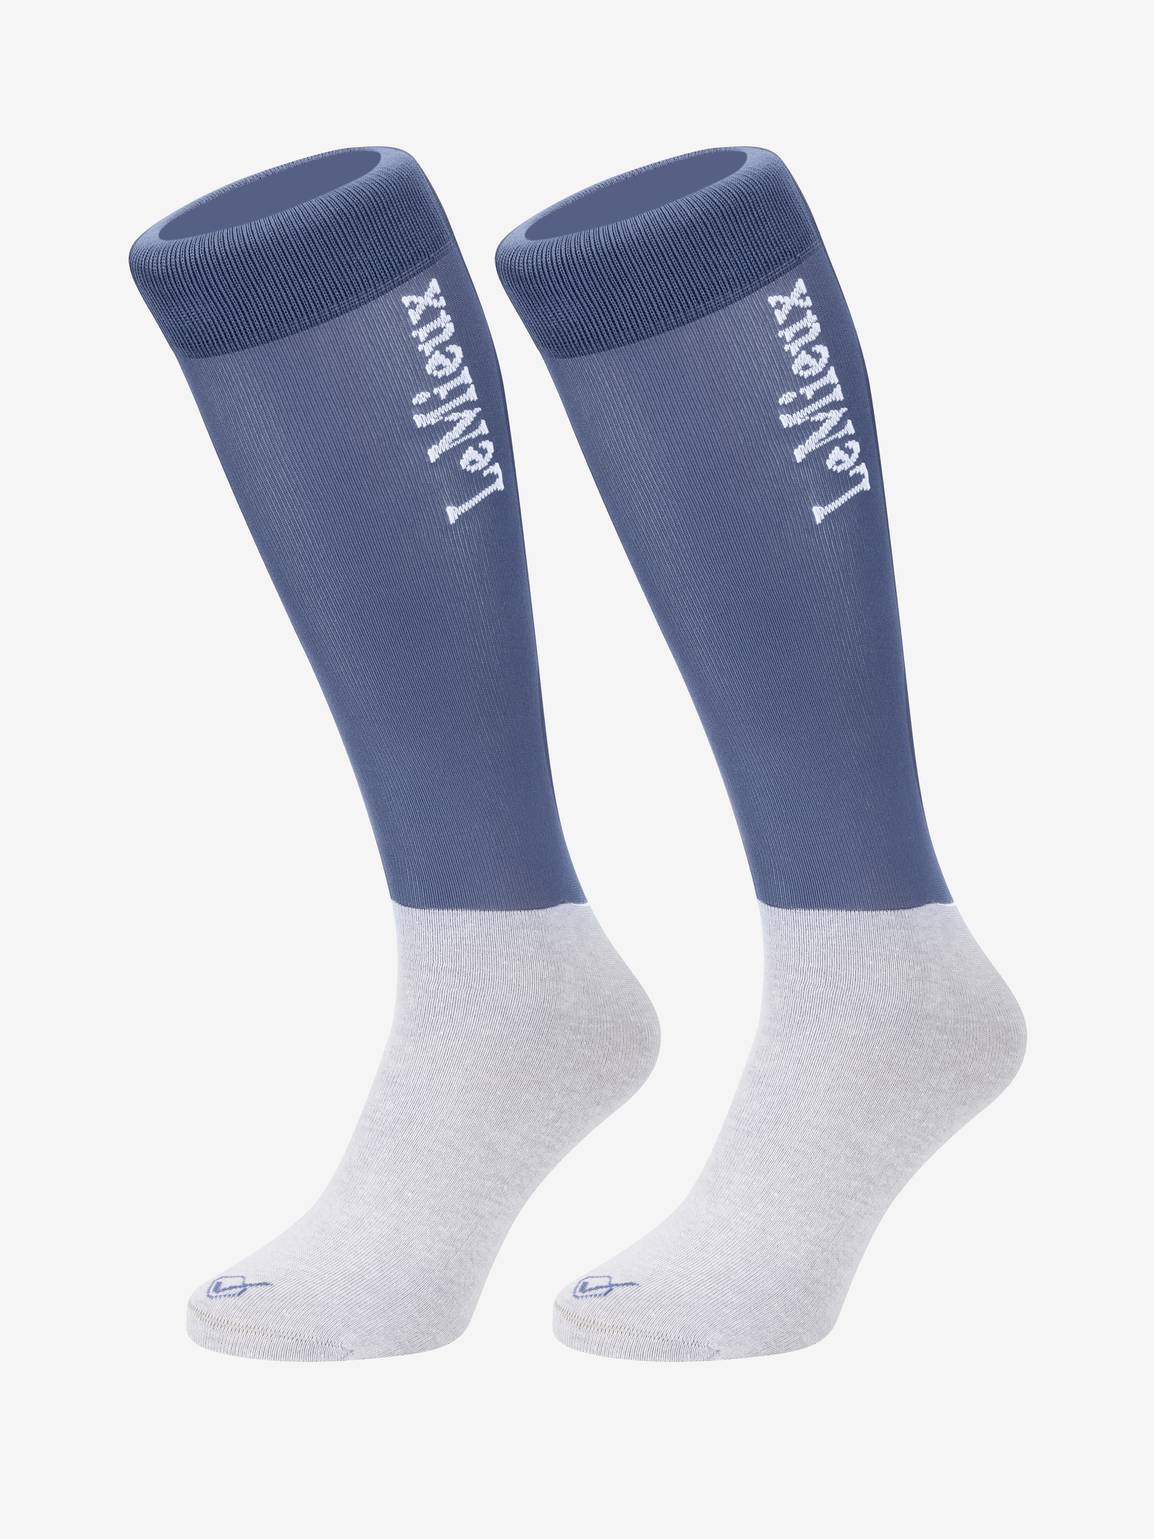 LeMieux Competition Socks Ice Blue Twin Pack Large